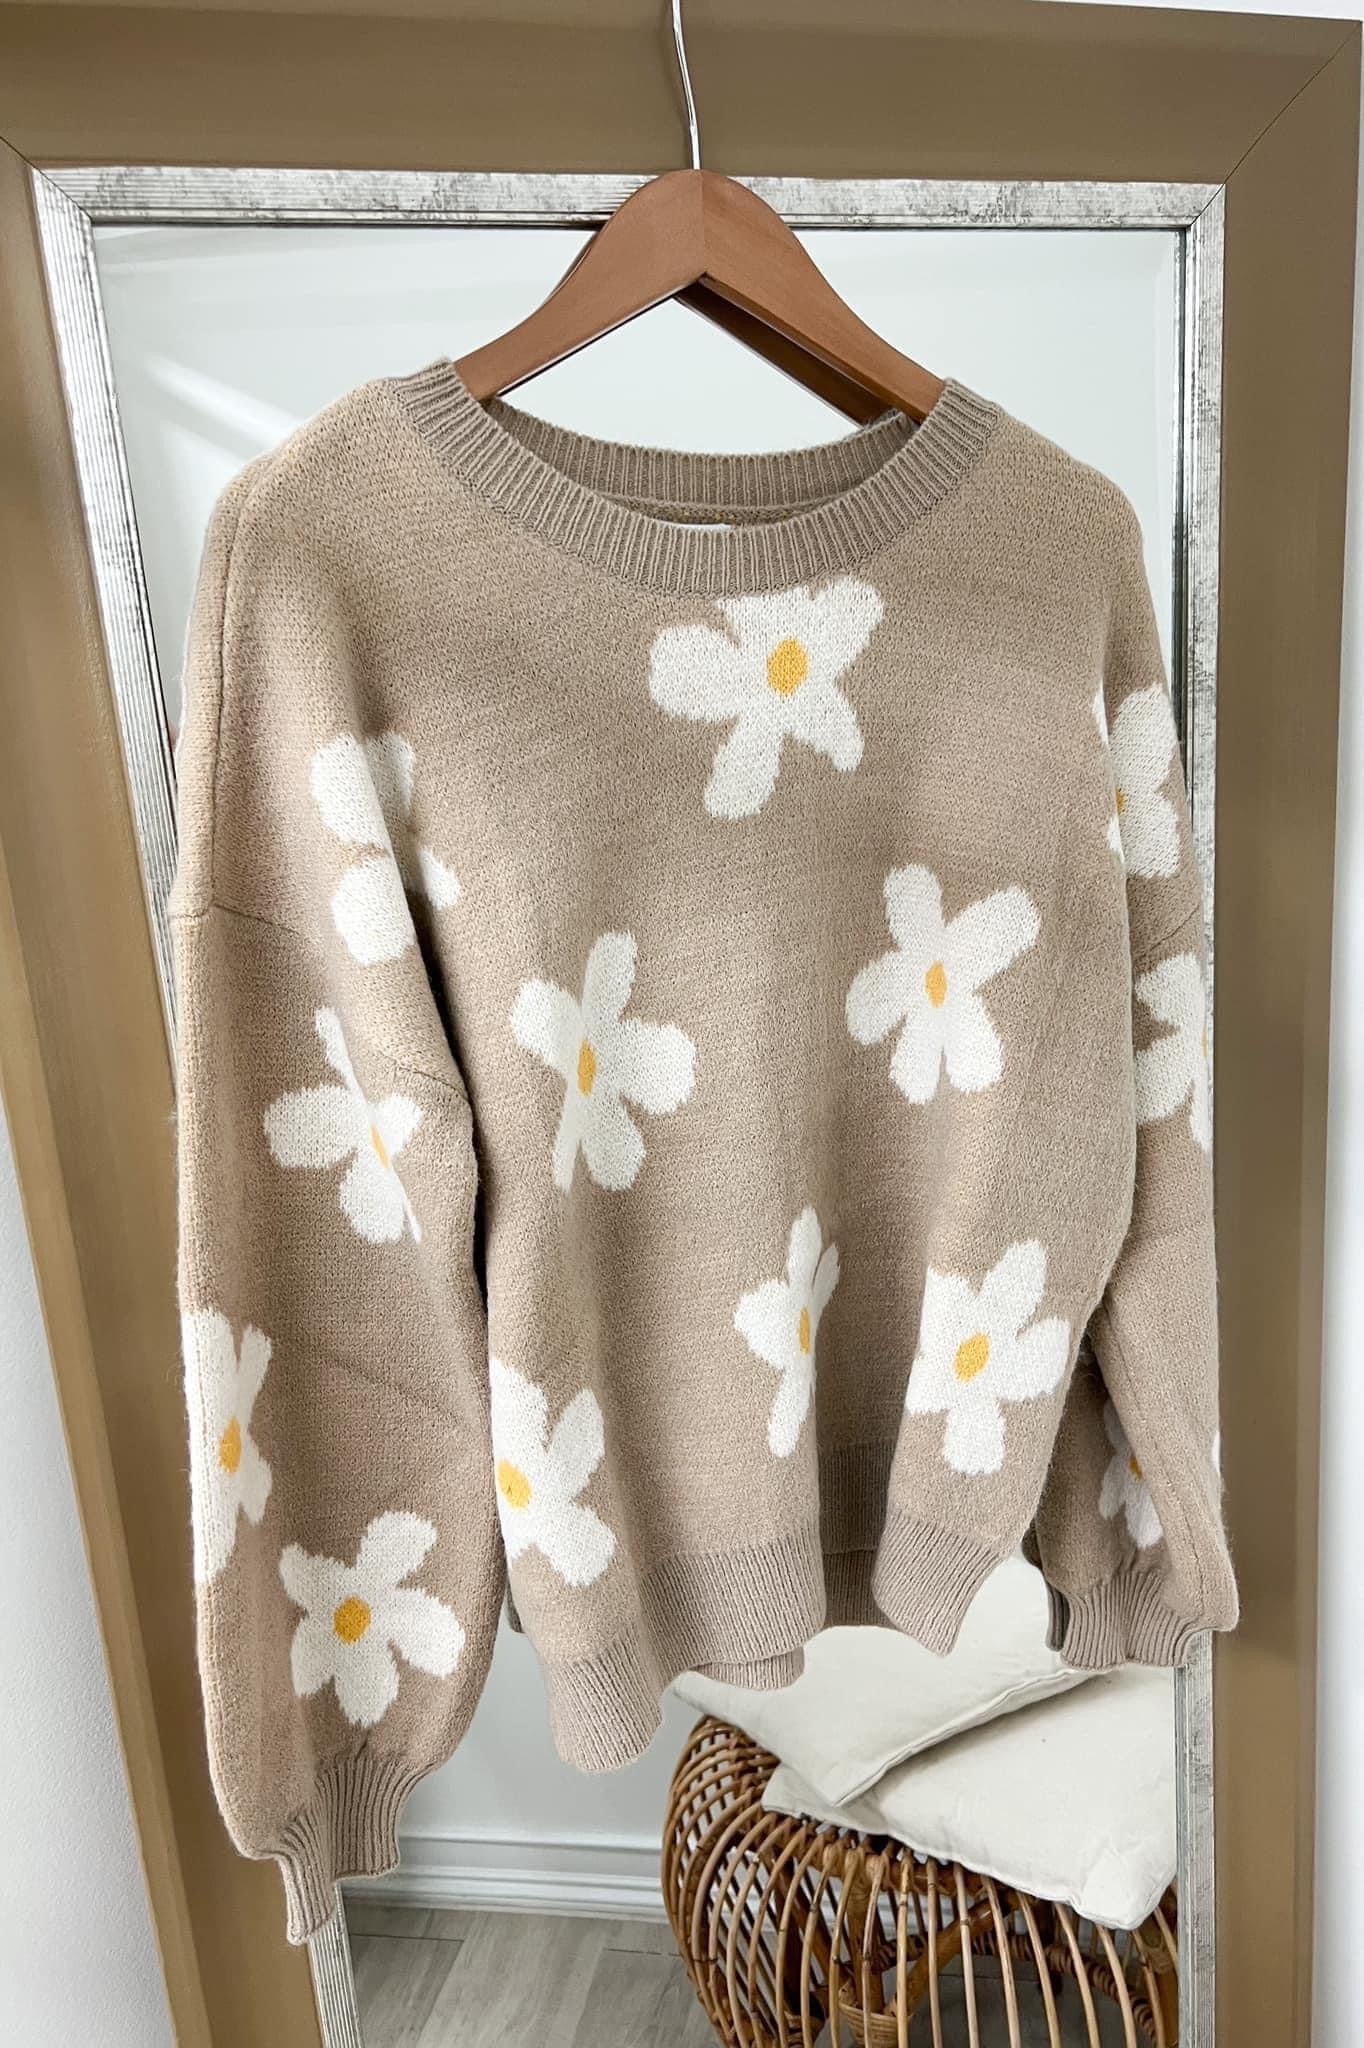 "Daisy May" Sweater - Happily Ever Aften